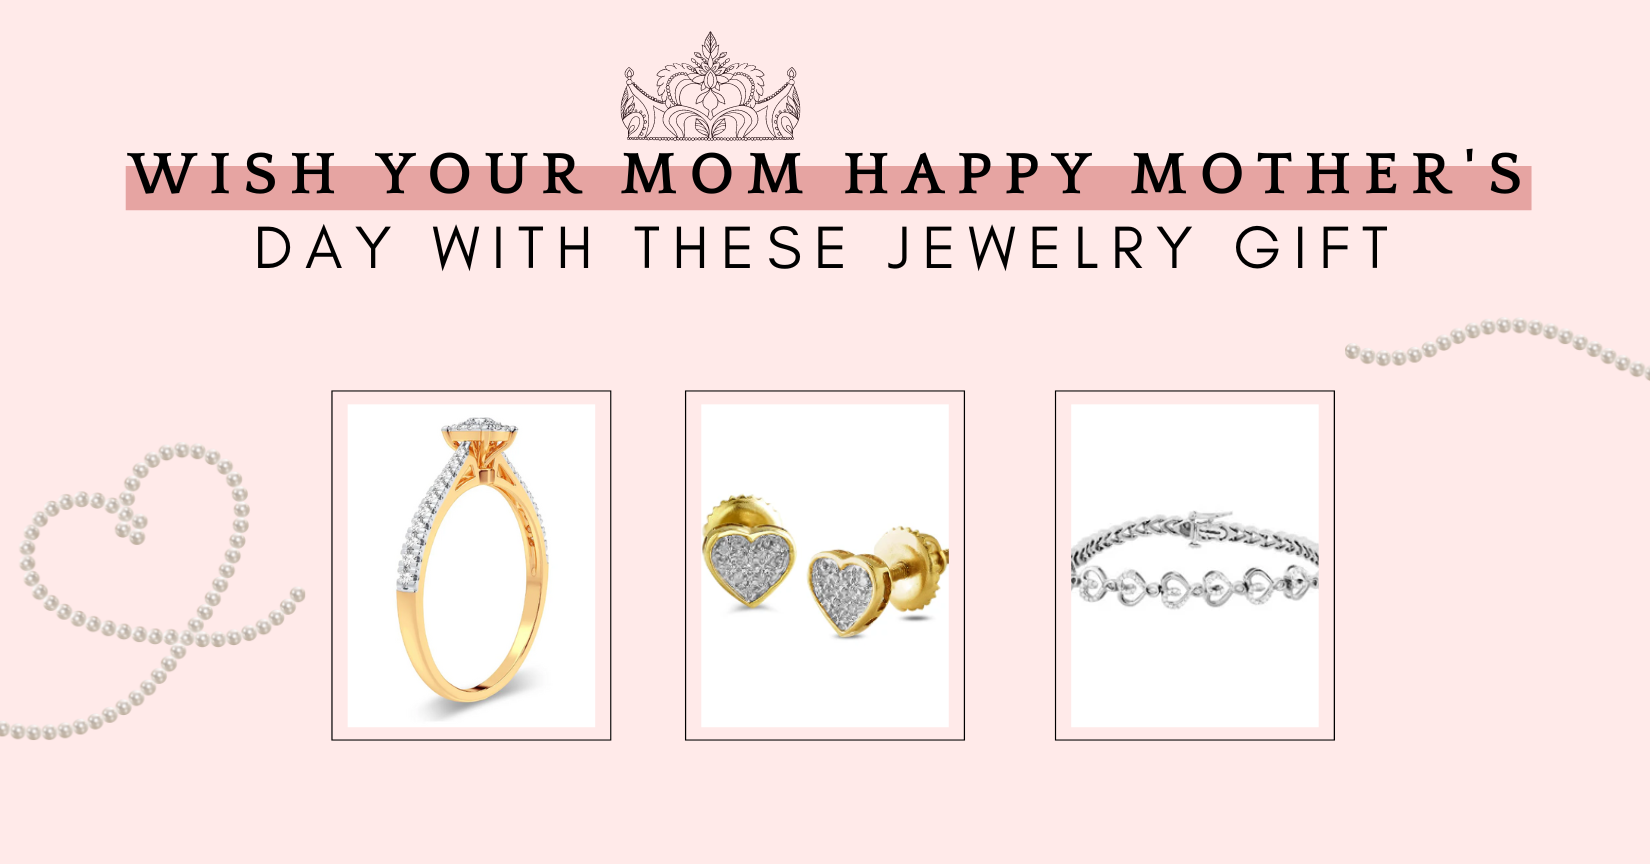 Wish your mom happy mother's day with these jewelry gift